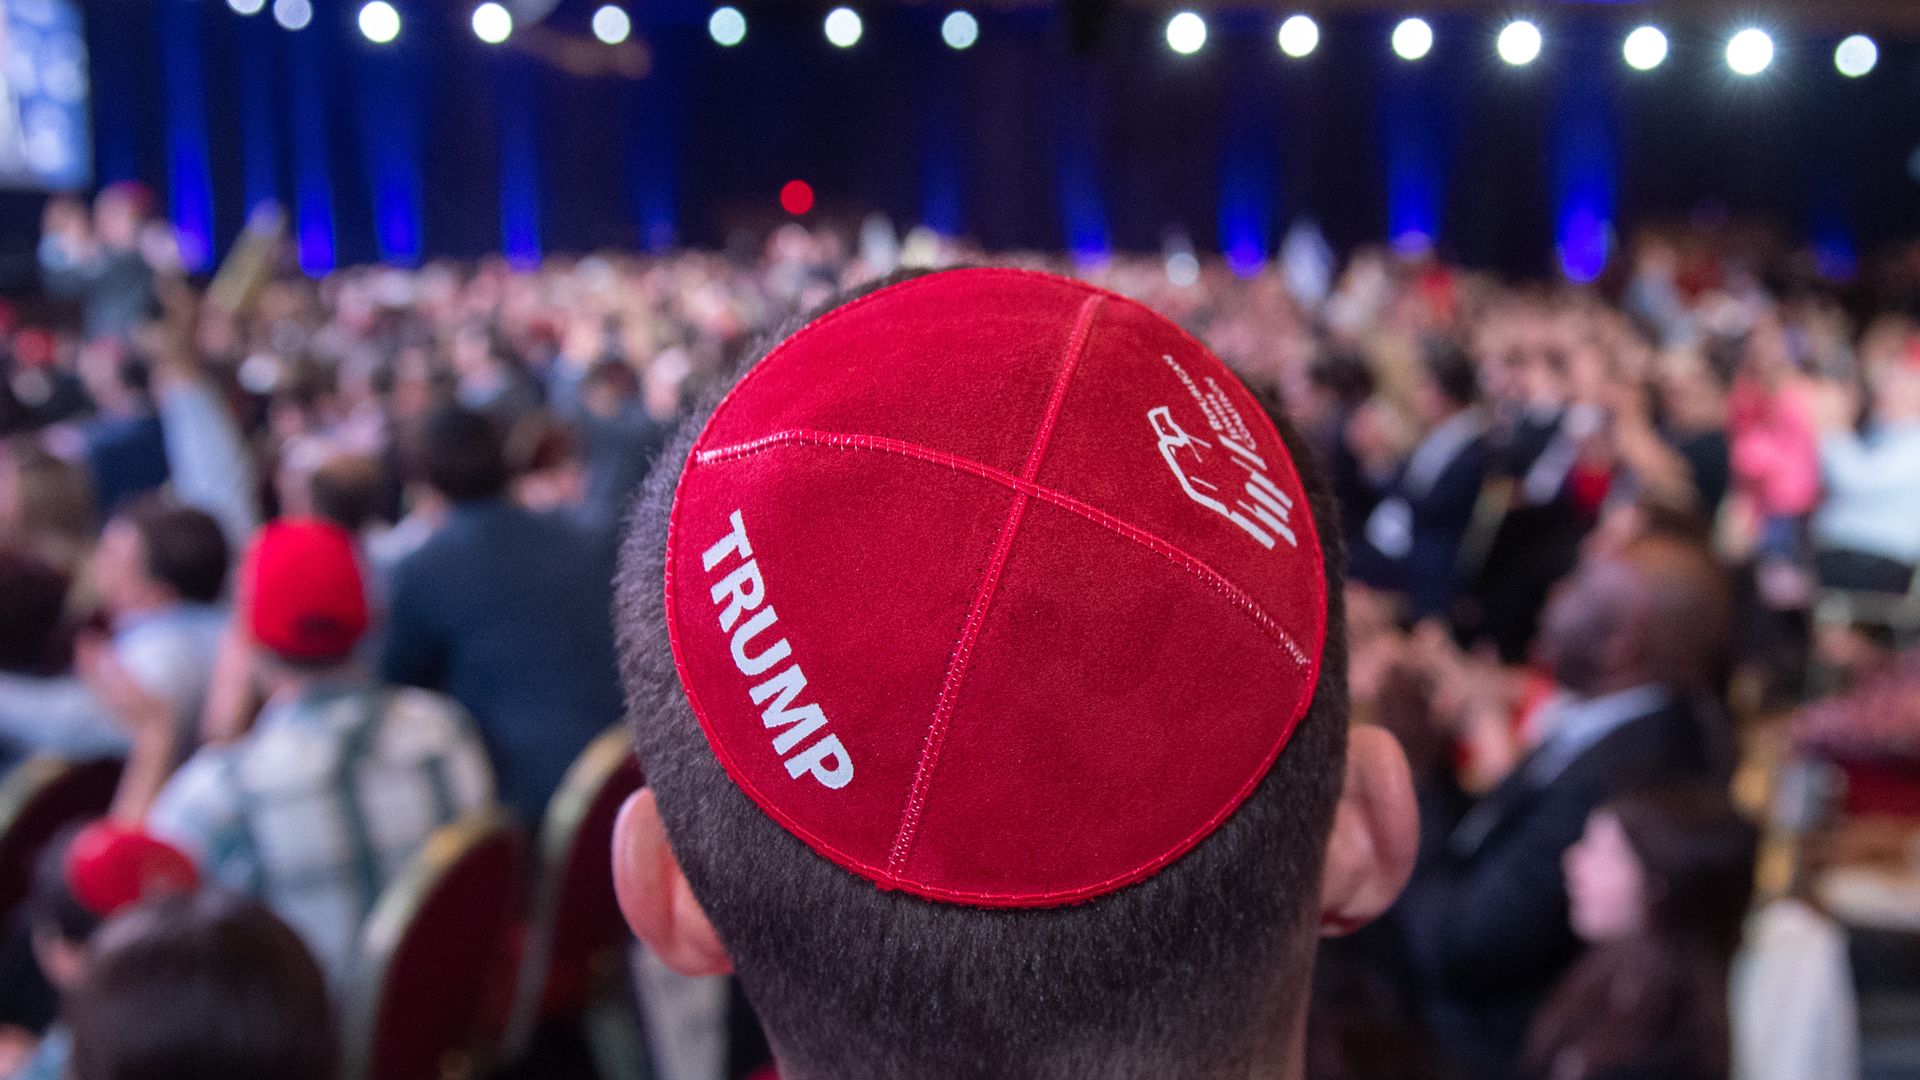 A man wears a Trump yarmulke prior to a speech by Trump during the Republican Jewish Coalition. 